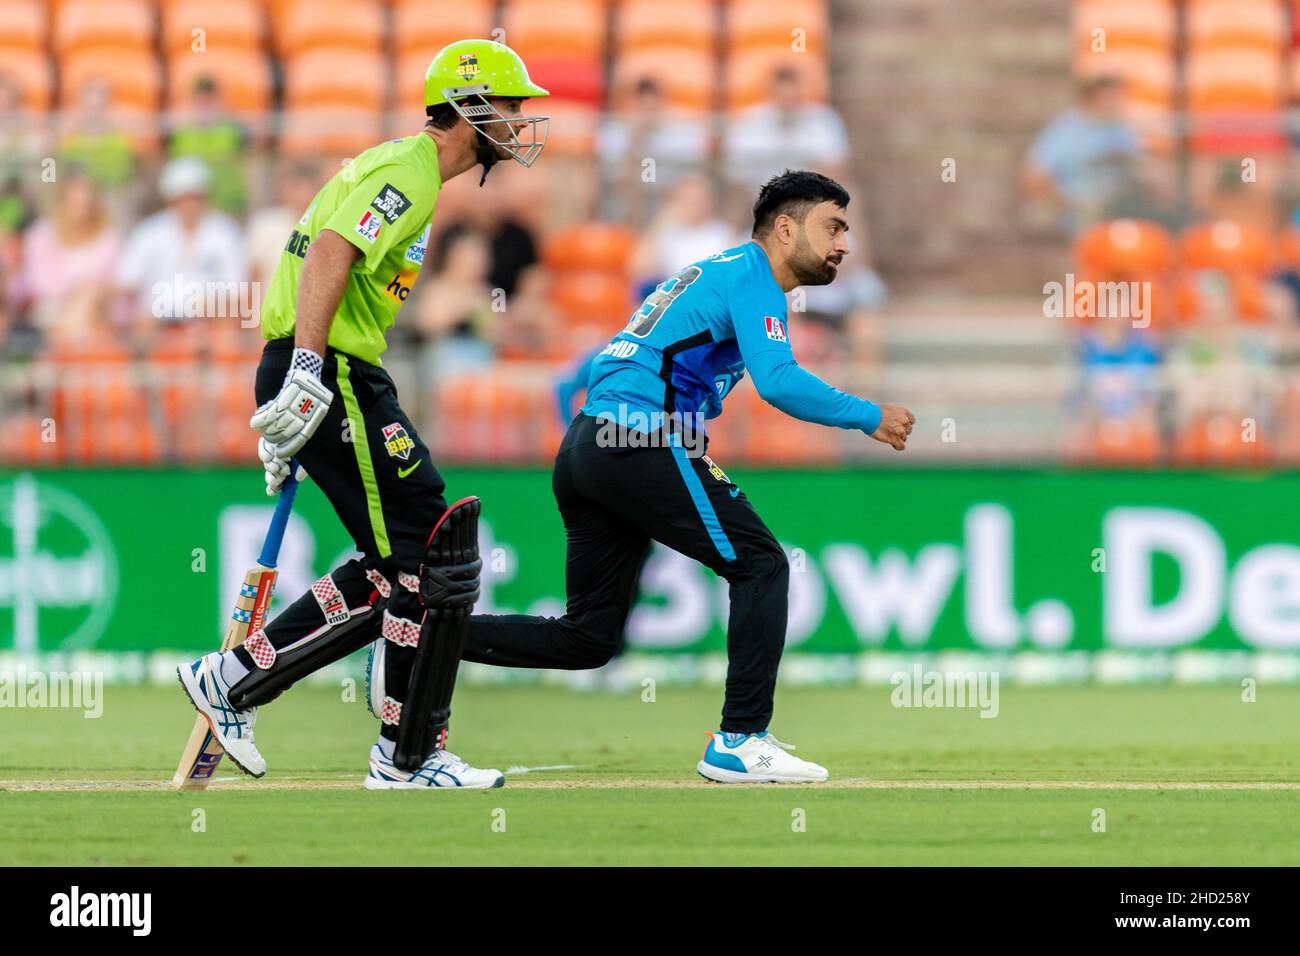 Sydney, Australia. 02nd Jan, 2022. Rashid Khan of Strikers bowls during the match between Sydney Thunder and Adelaide Strikers at Sydney Showground Stadium, on January 02, 2022, in Sydney, Australia. (Editorial use only) Credit: Izhar Ahmed Khan/Alamy Live News/Alamy Live News Stock Photo